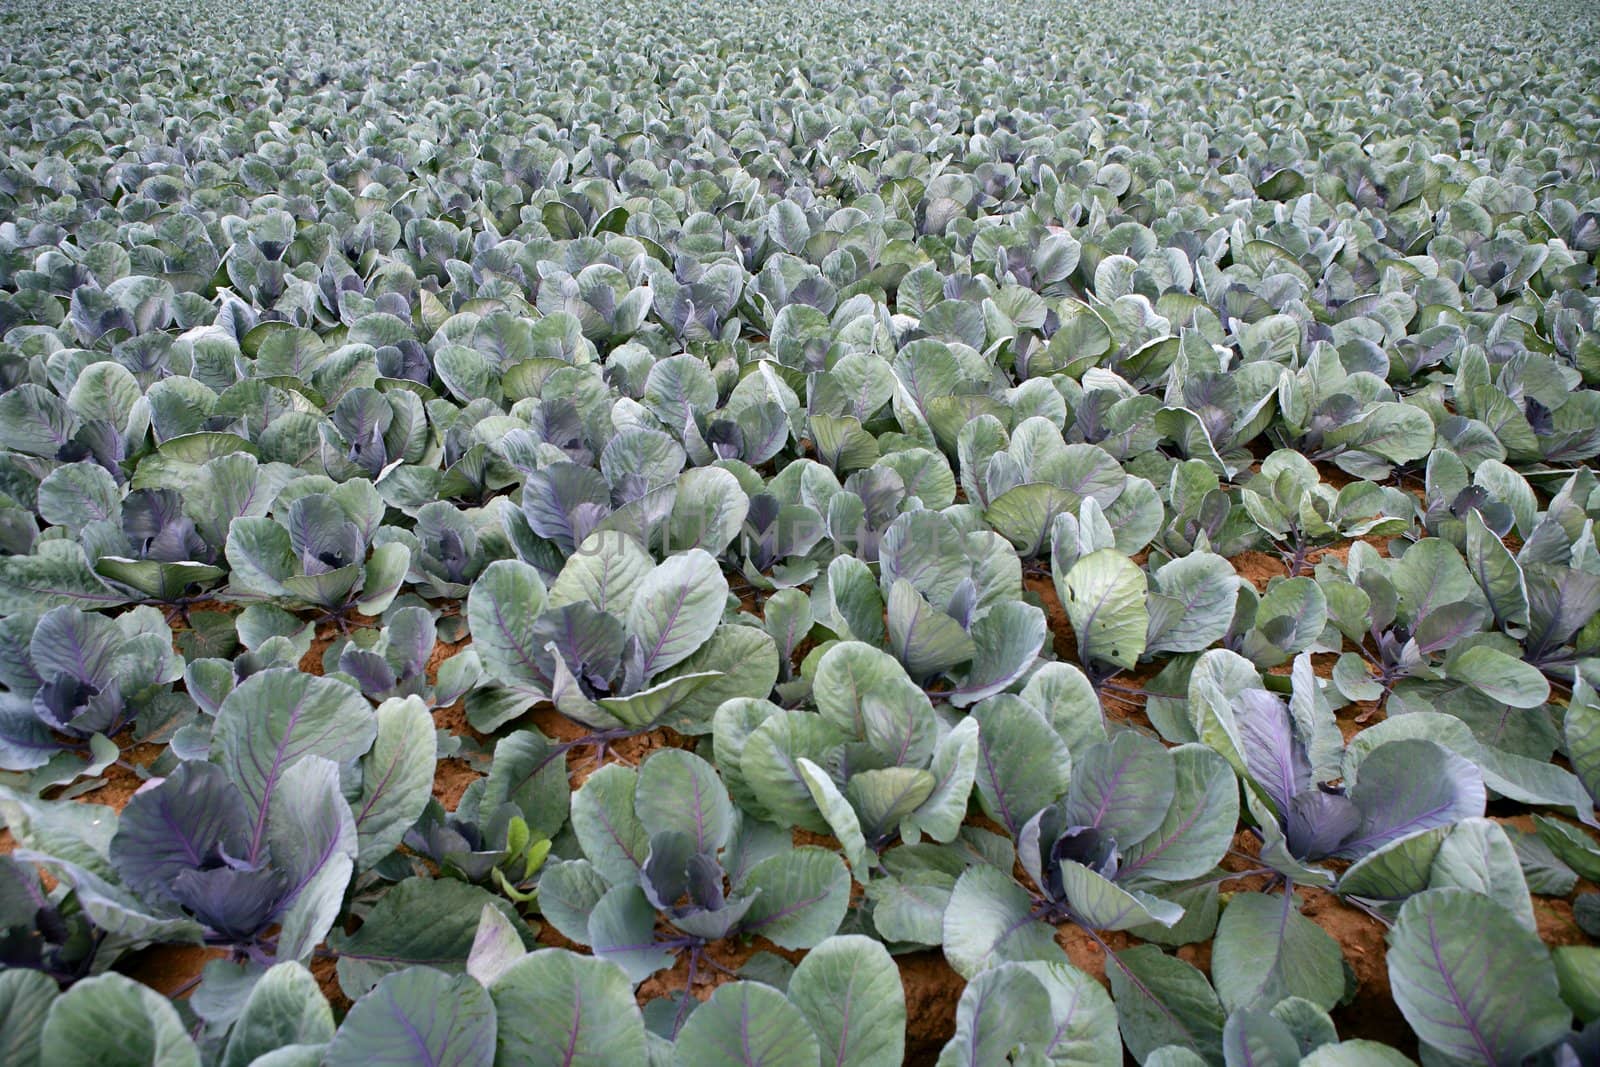 Cabbage fields, rows of vegetable food by lunamarina